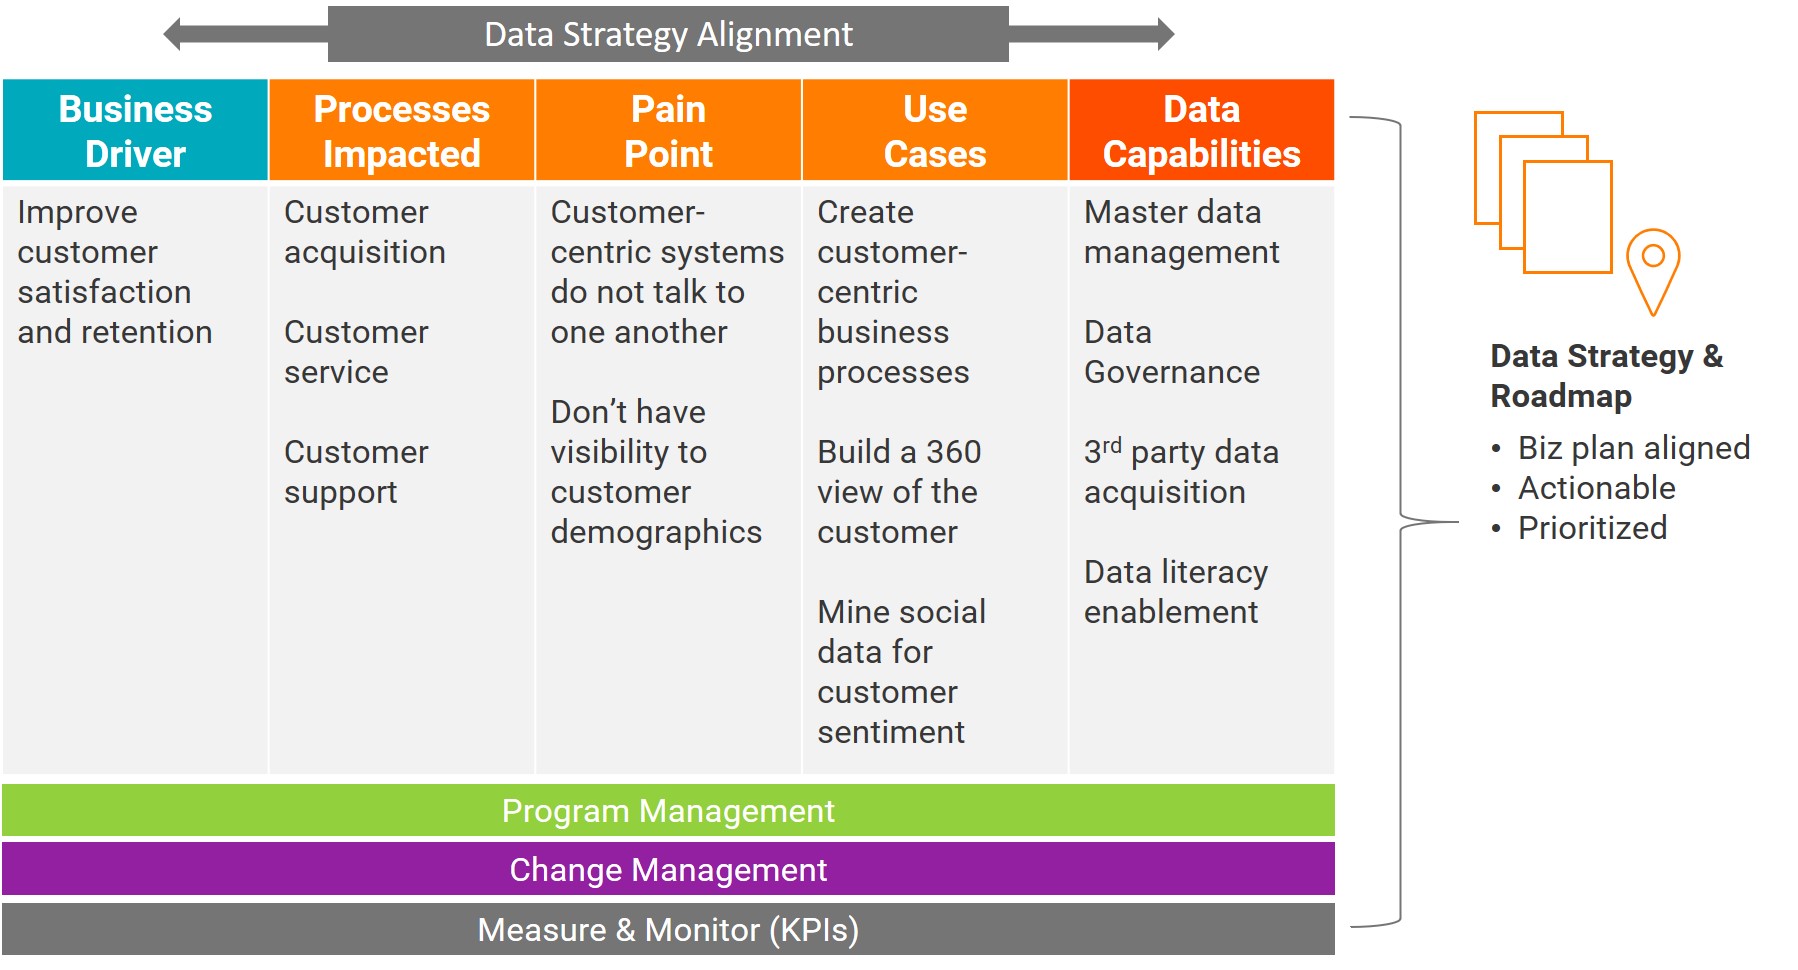 Data Strategy Alignment